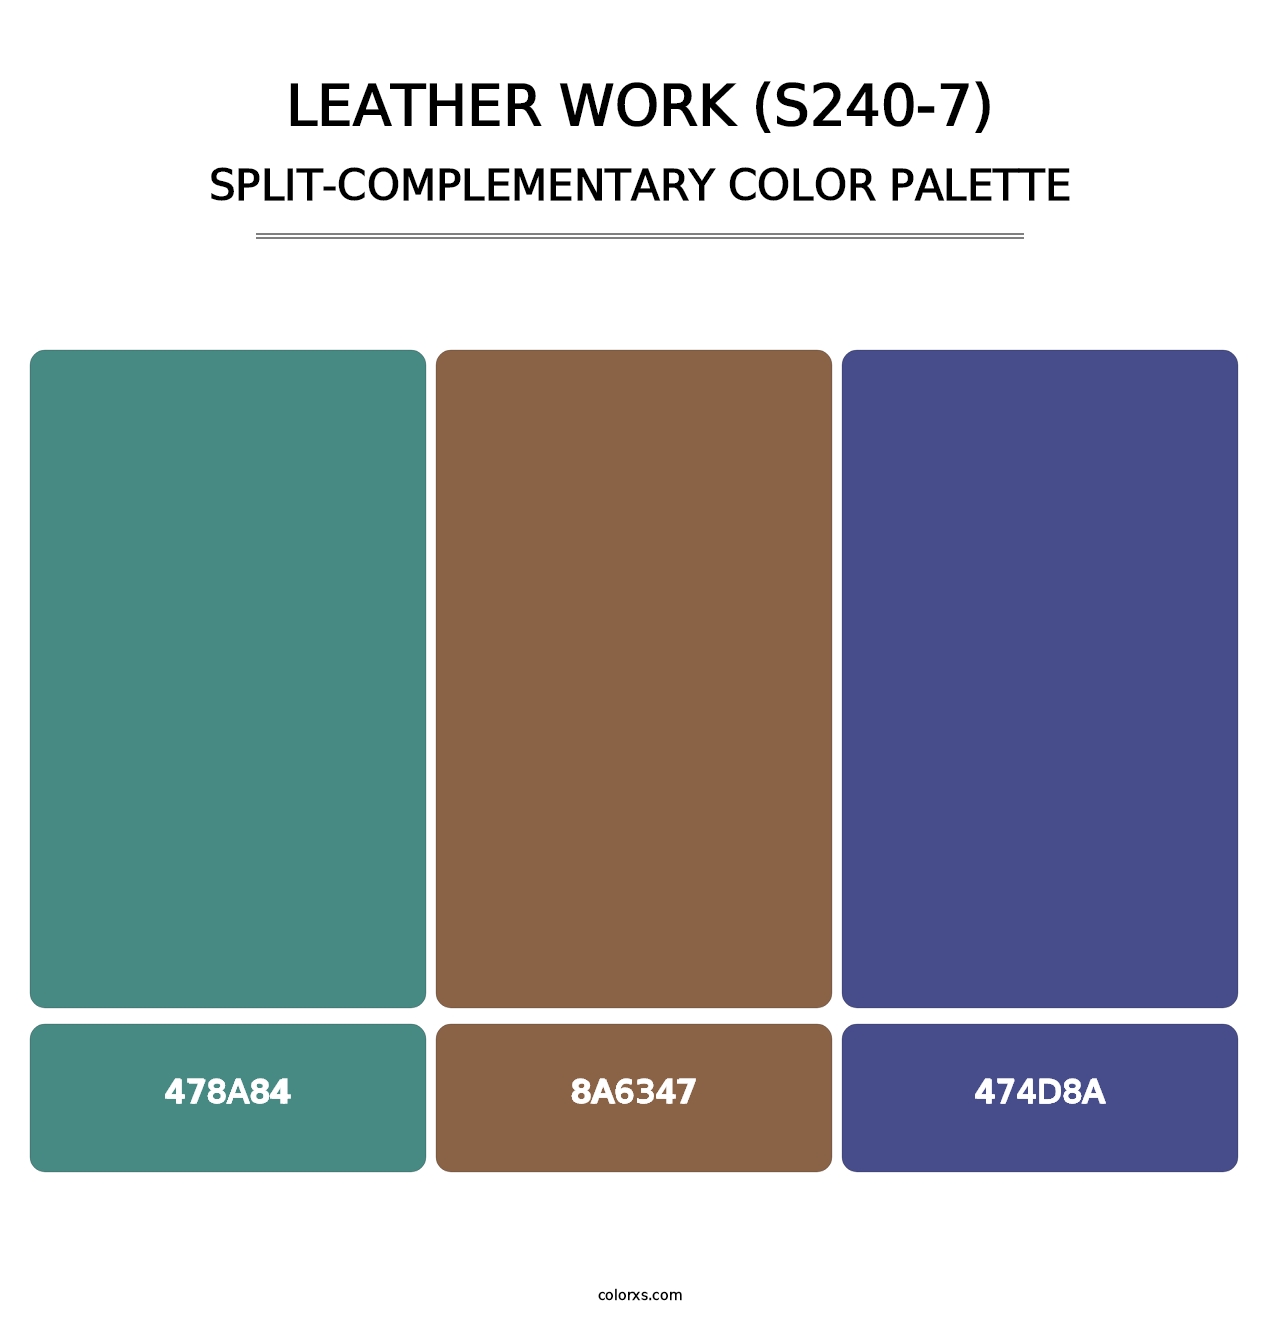 Leather Work (S240-7) - Split-Complementary Color Palette